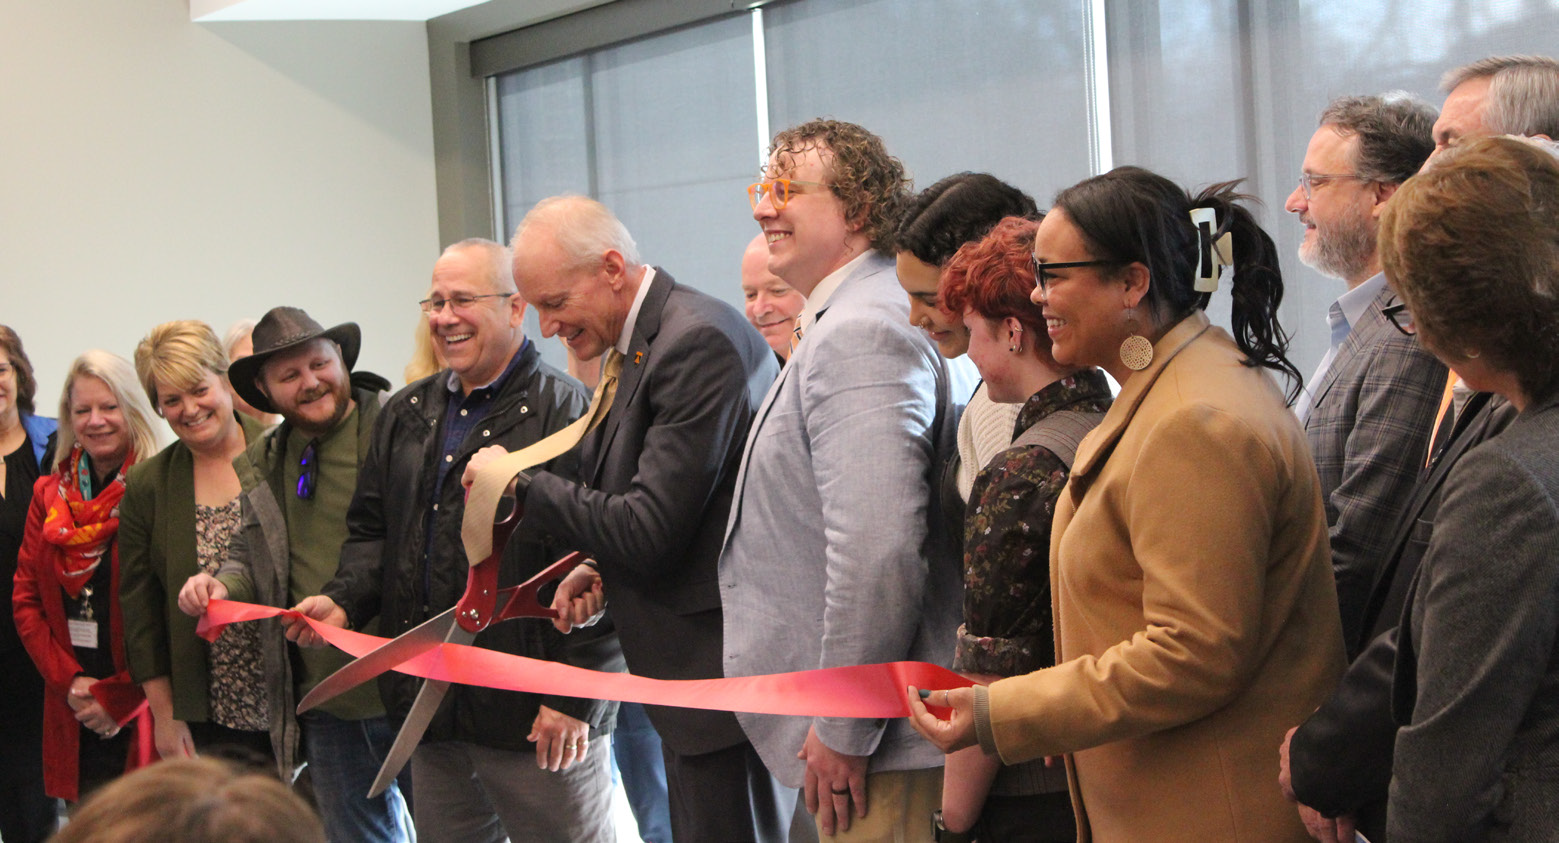 Ribbon cutting event for New Hall